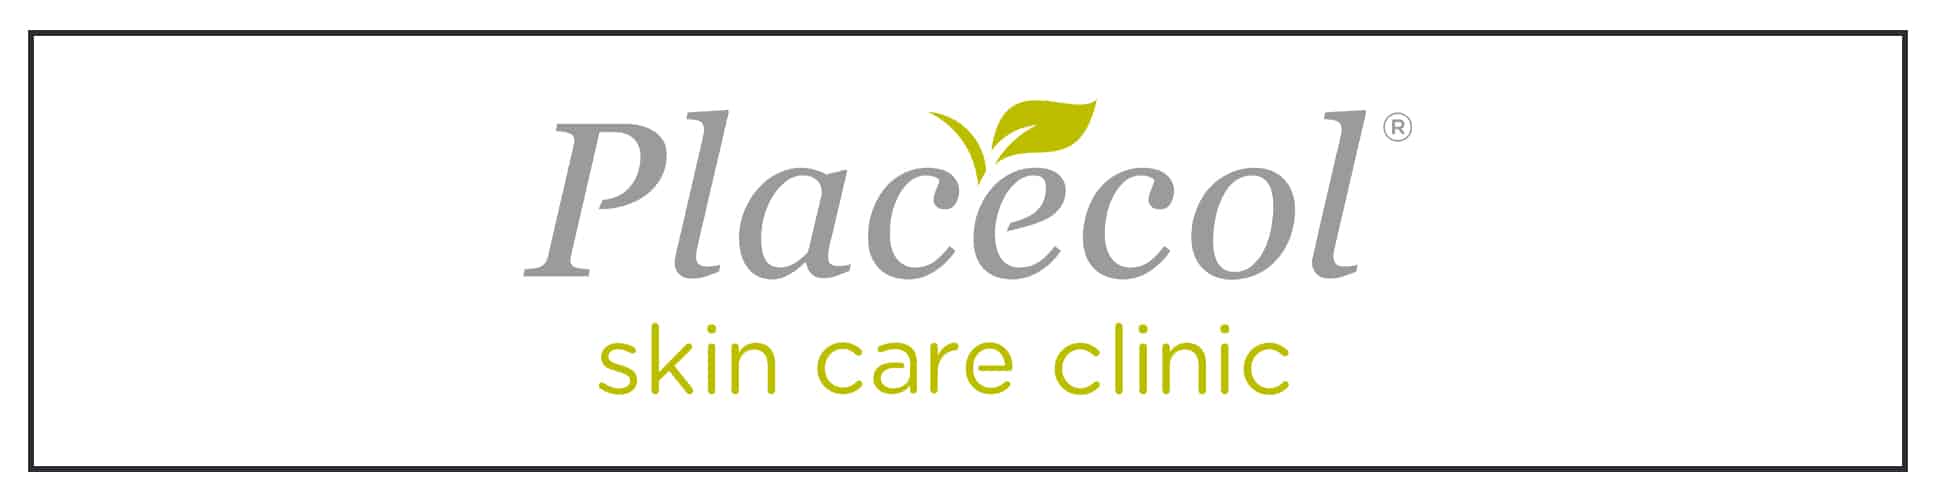 Placecol skin care clinic logo.